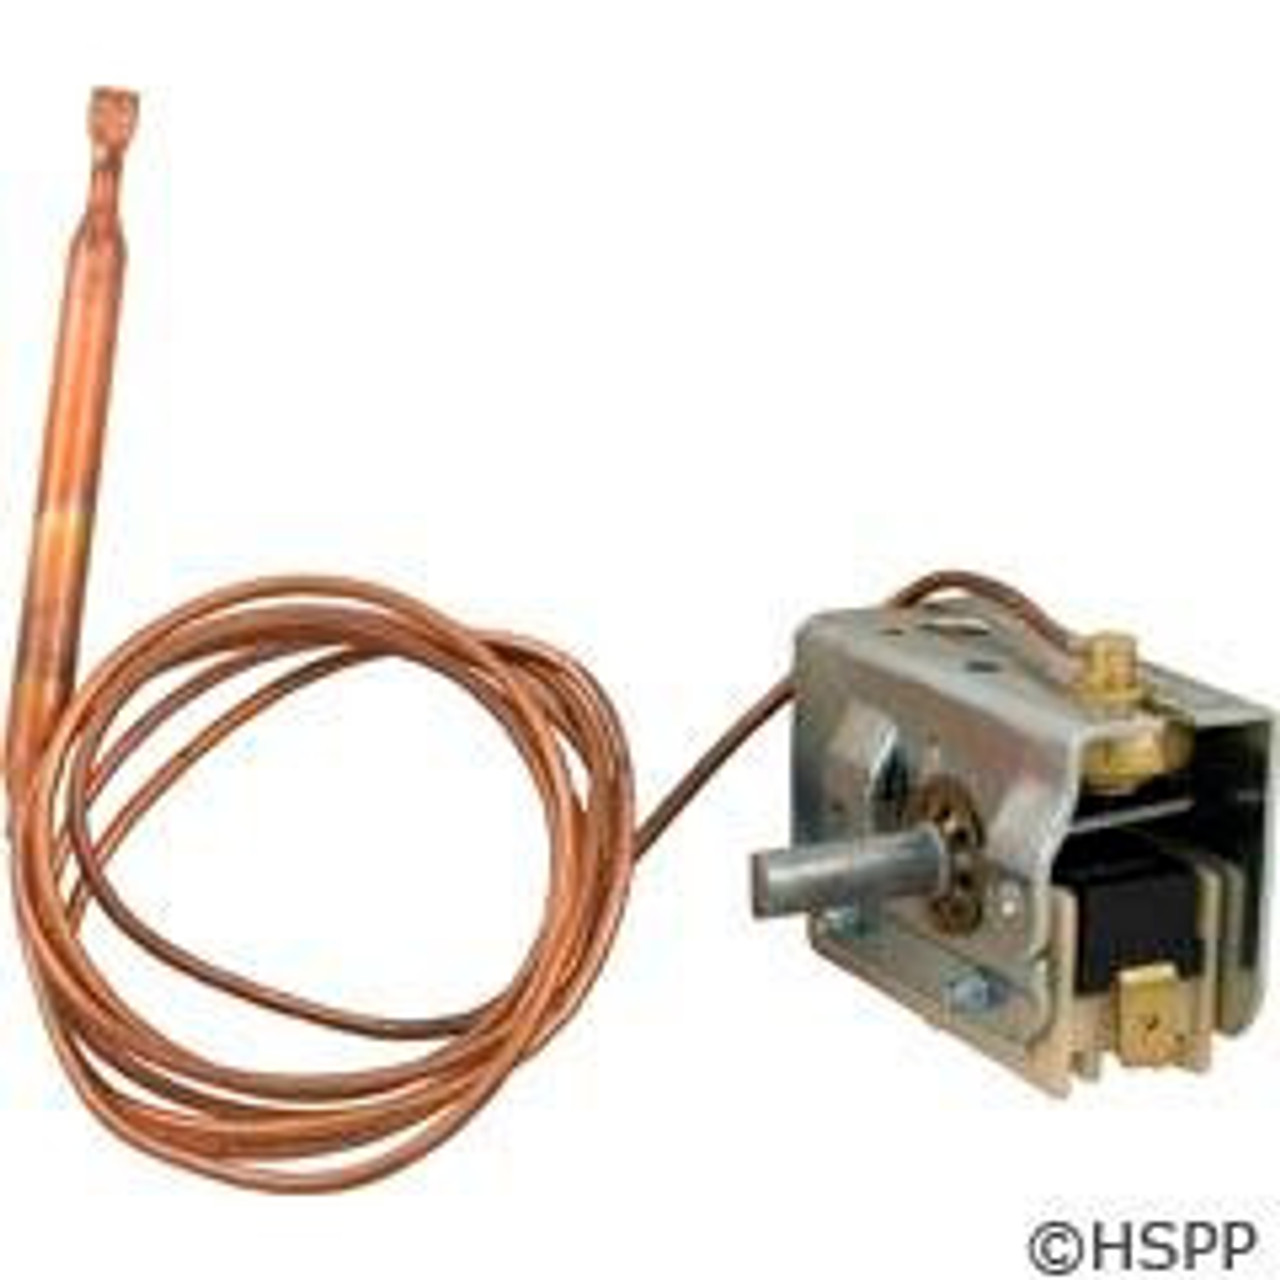 Thermostat, Invensys, 1/4", 48", SPST, 25A